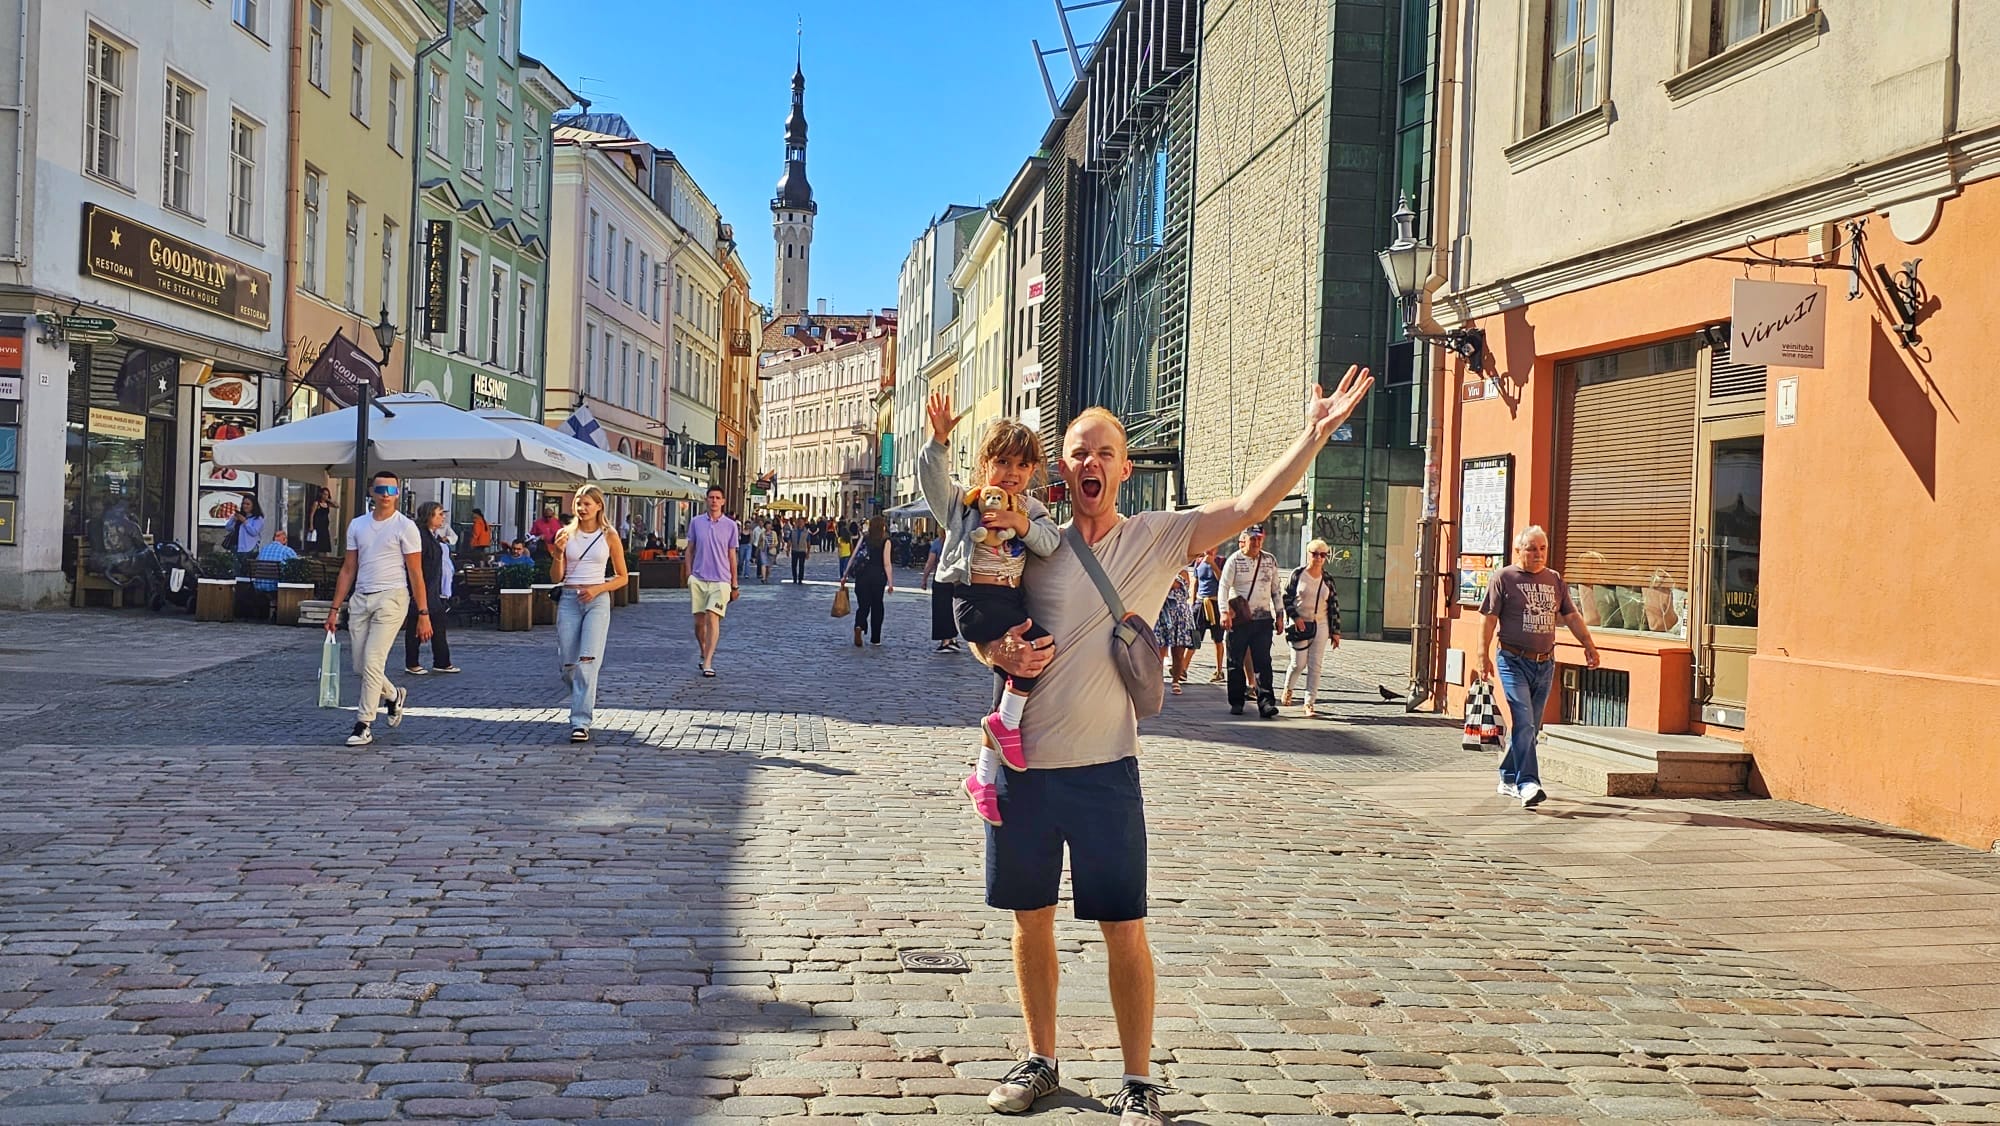 Tallinn Old Town - must see on itinerary